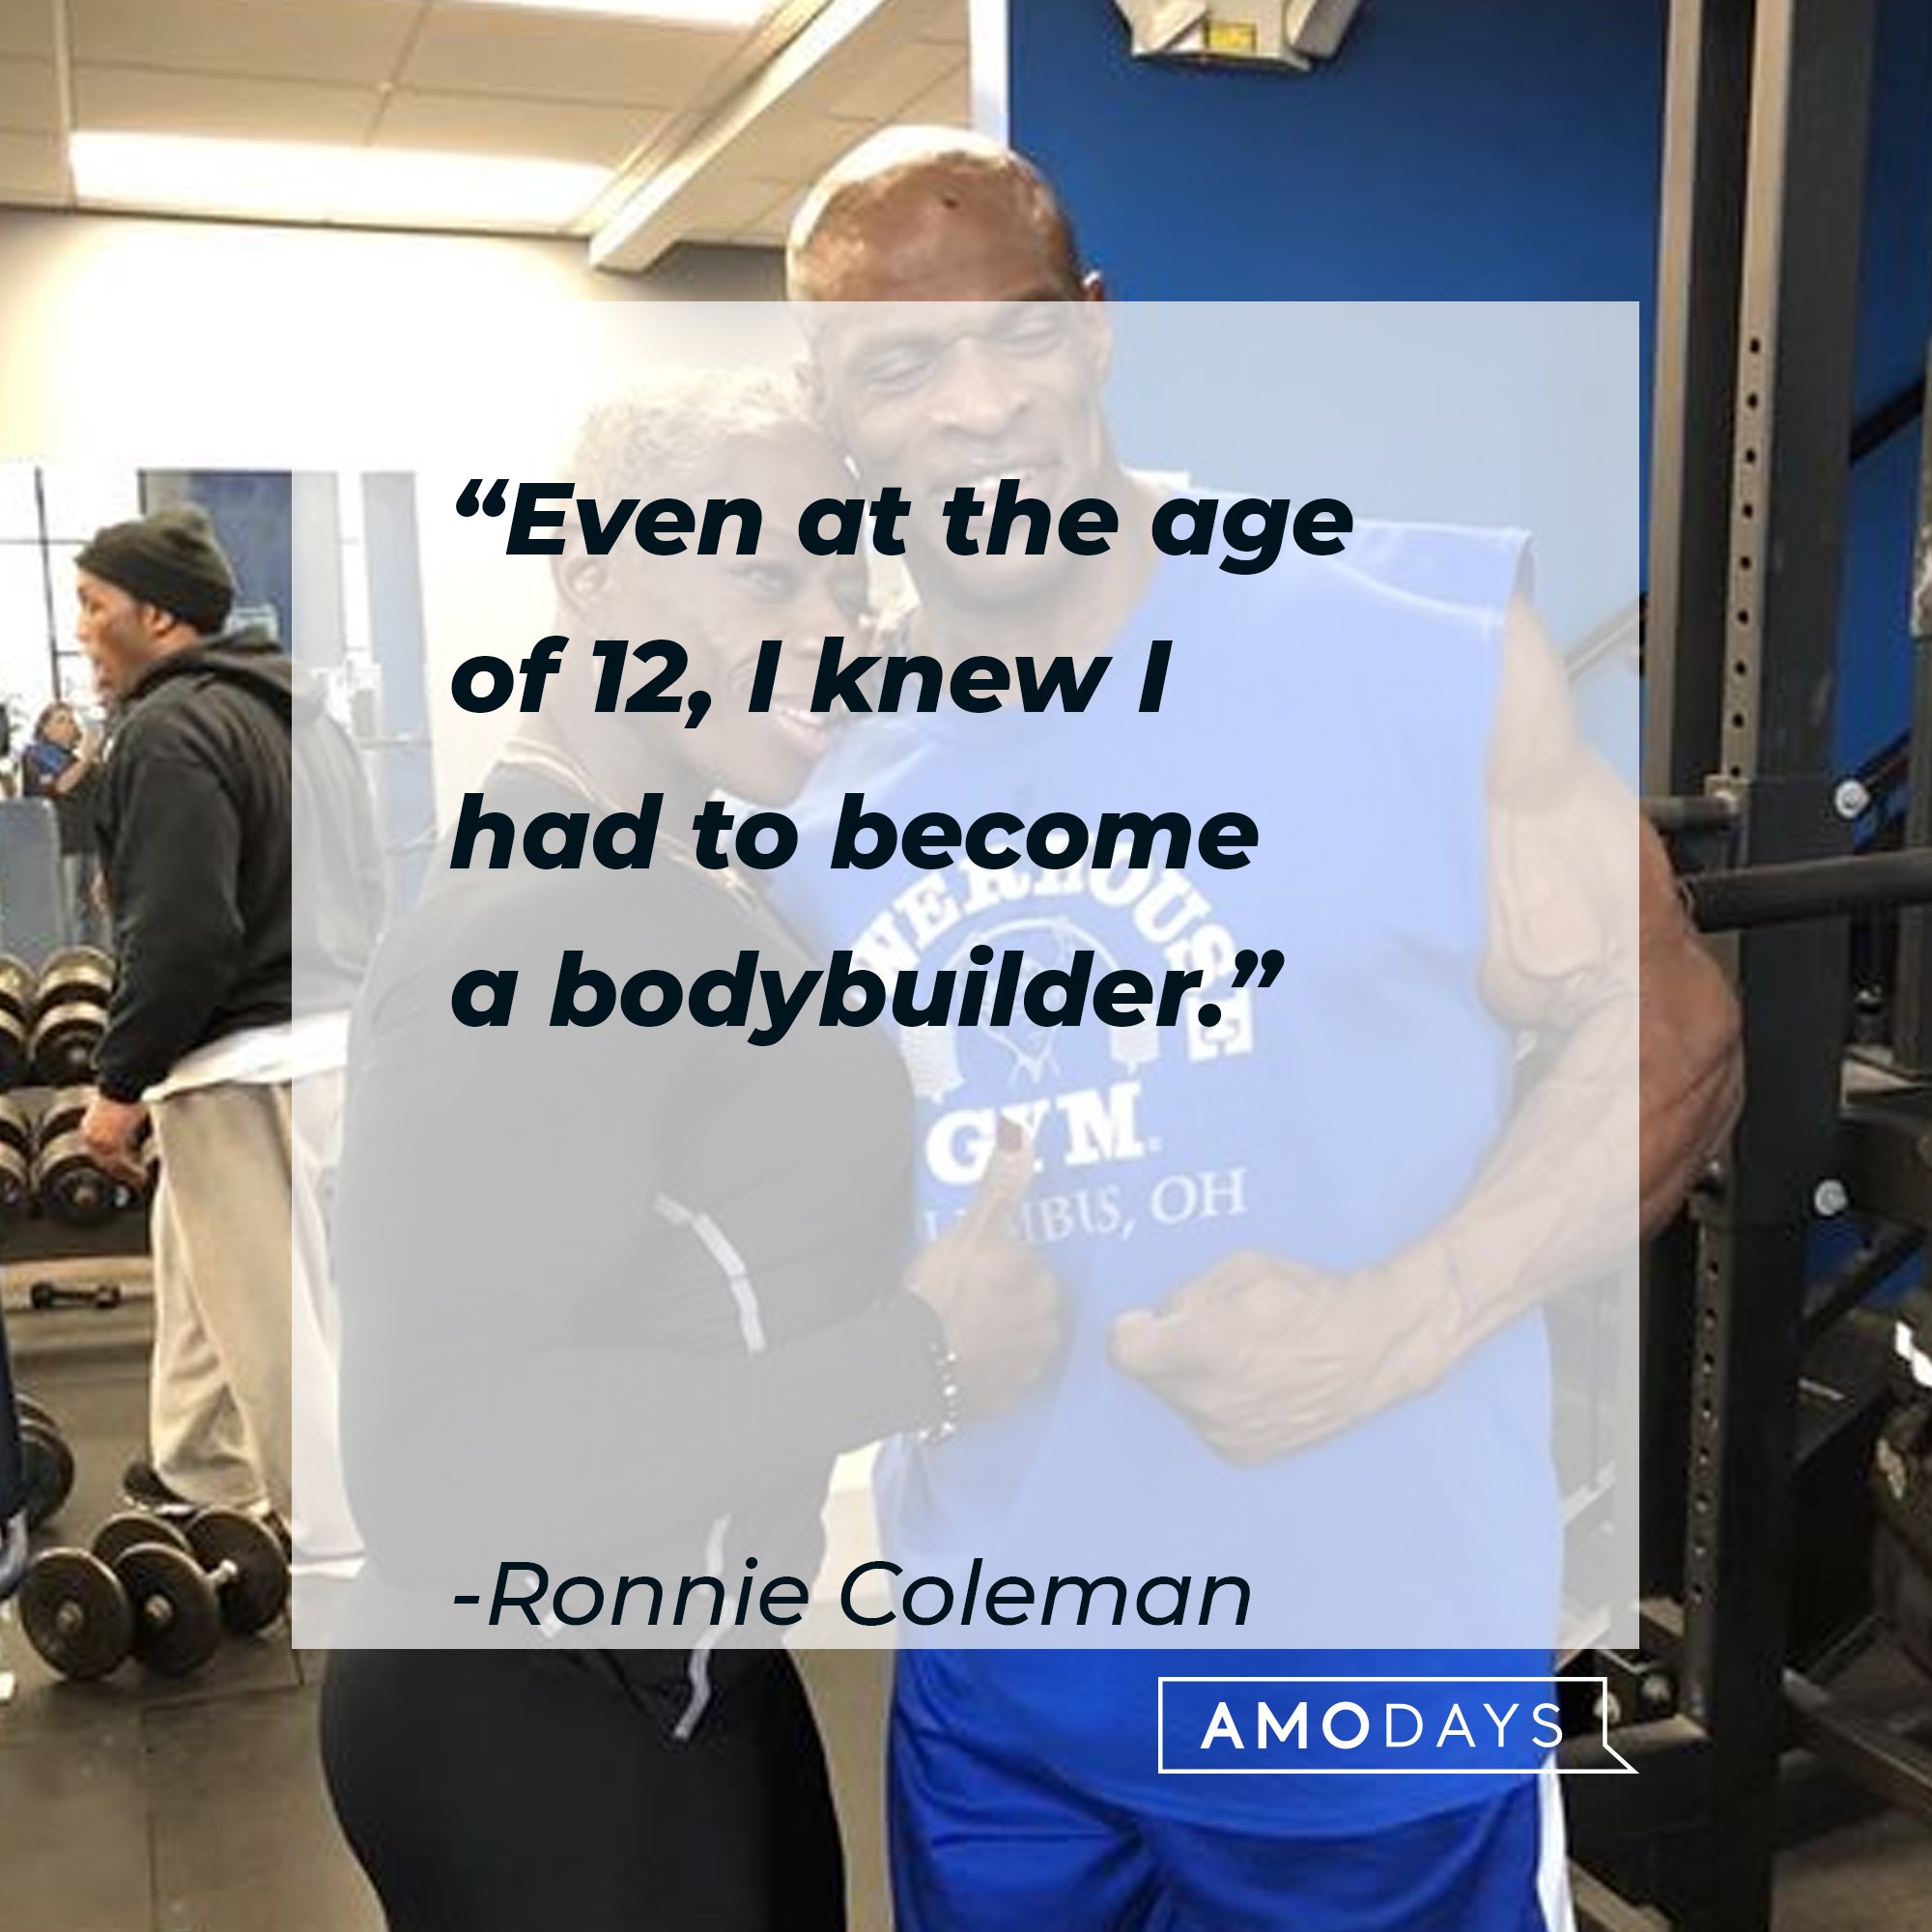  Ronnie Coleman’s quote: “Even at the age of 12, I knew I had to become a bodybuilder.”  | Image: AmoDays